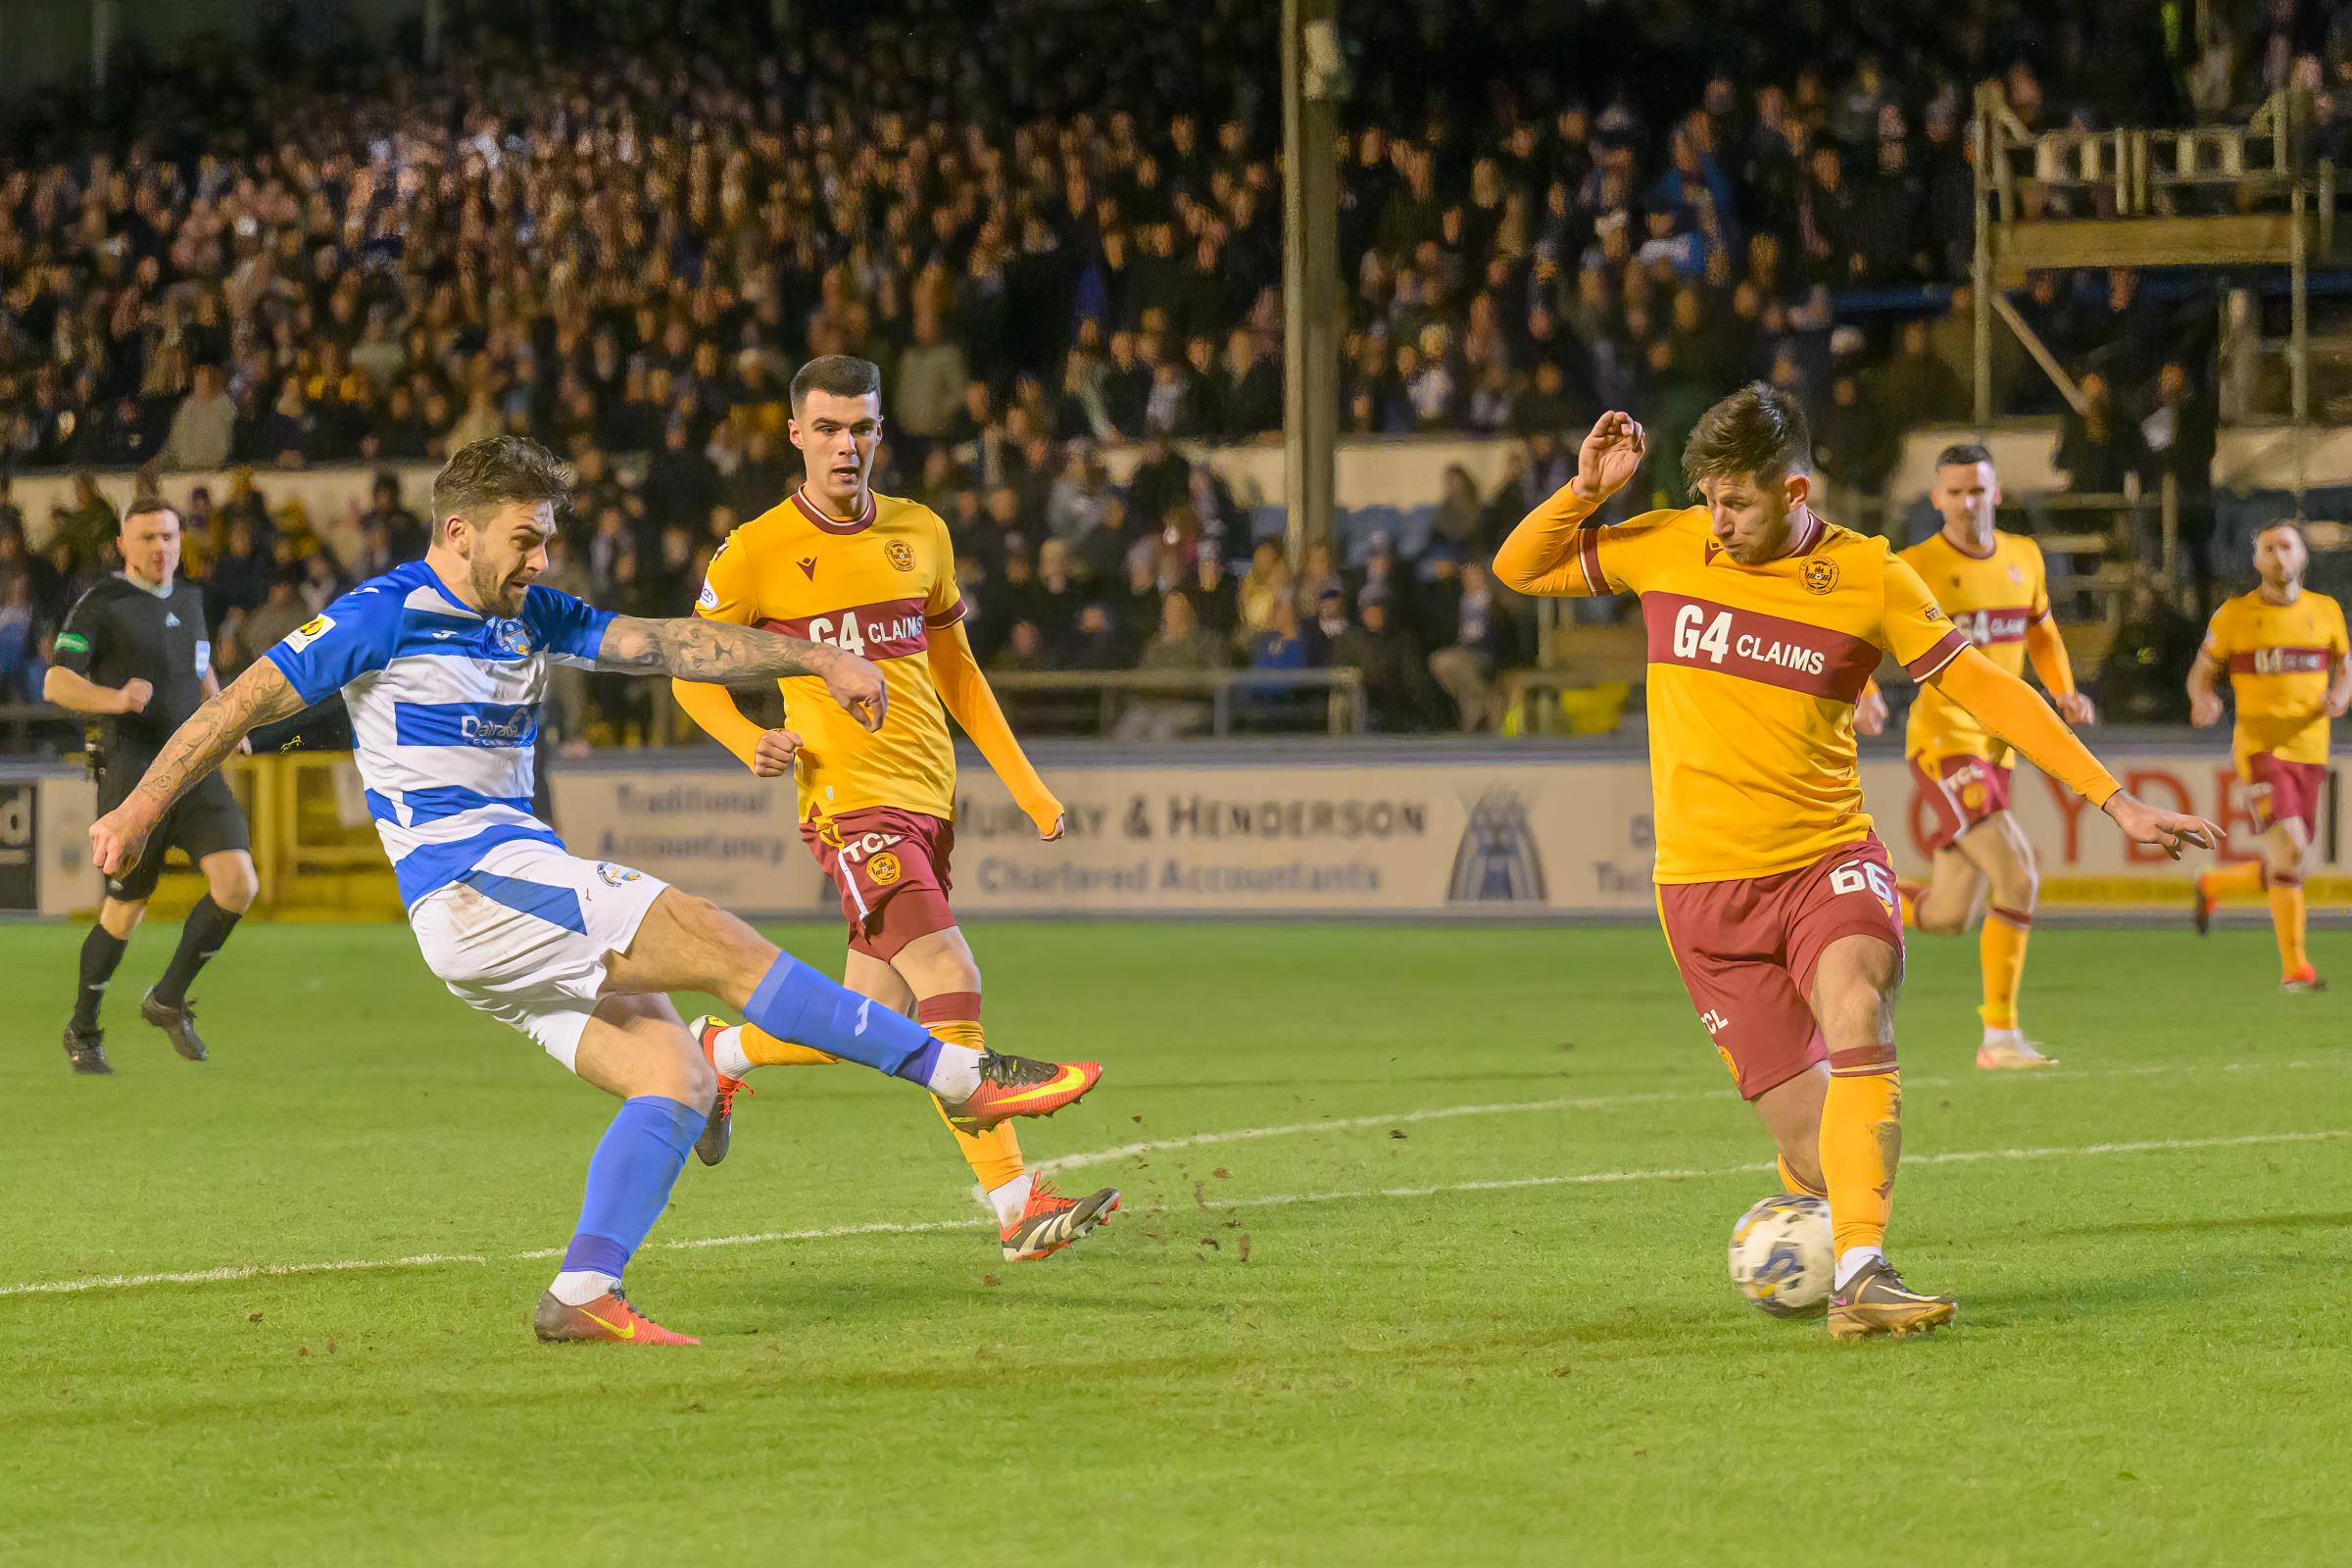 Togetherness was key to Morton's fine cup tie victory